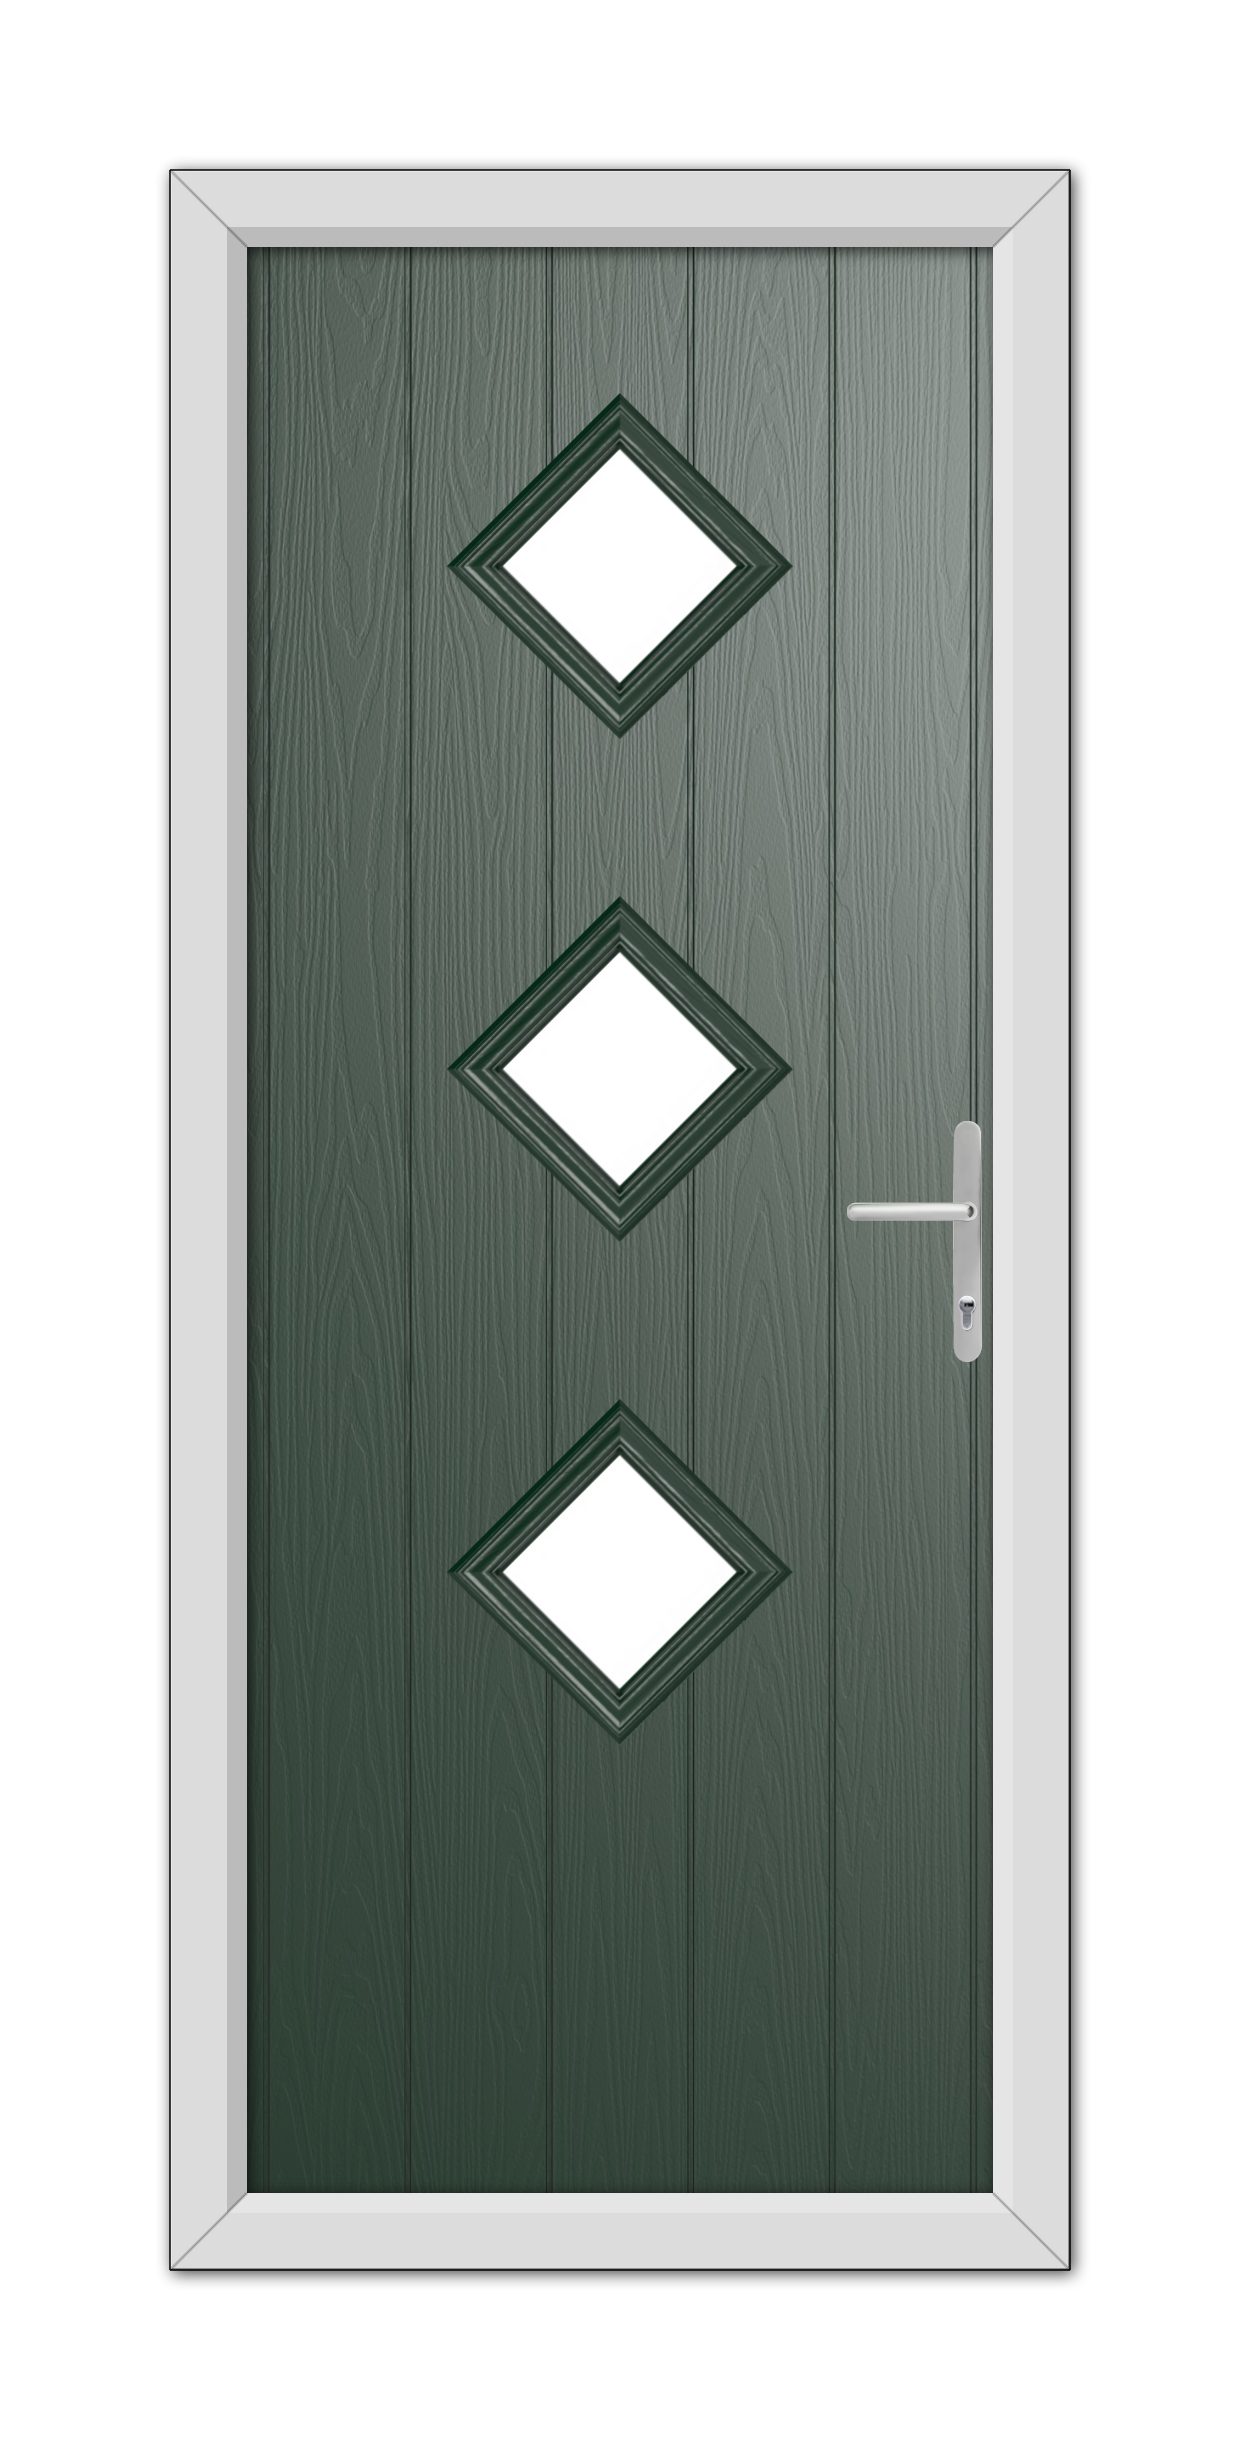 A Green Richmond Composite Door 48mm Timber Core with three diamond-shaped windows and a modern handle, set within a white frame.